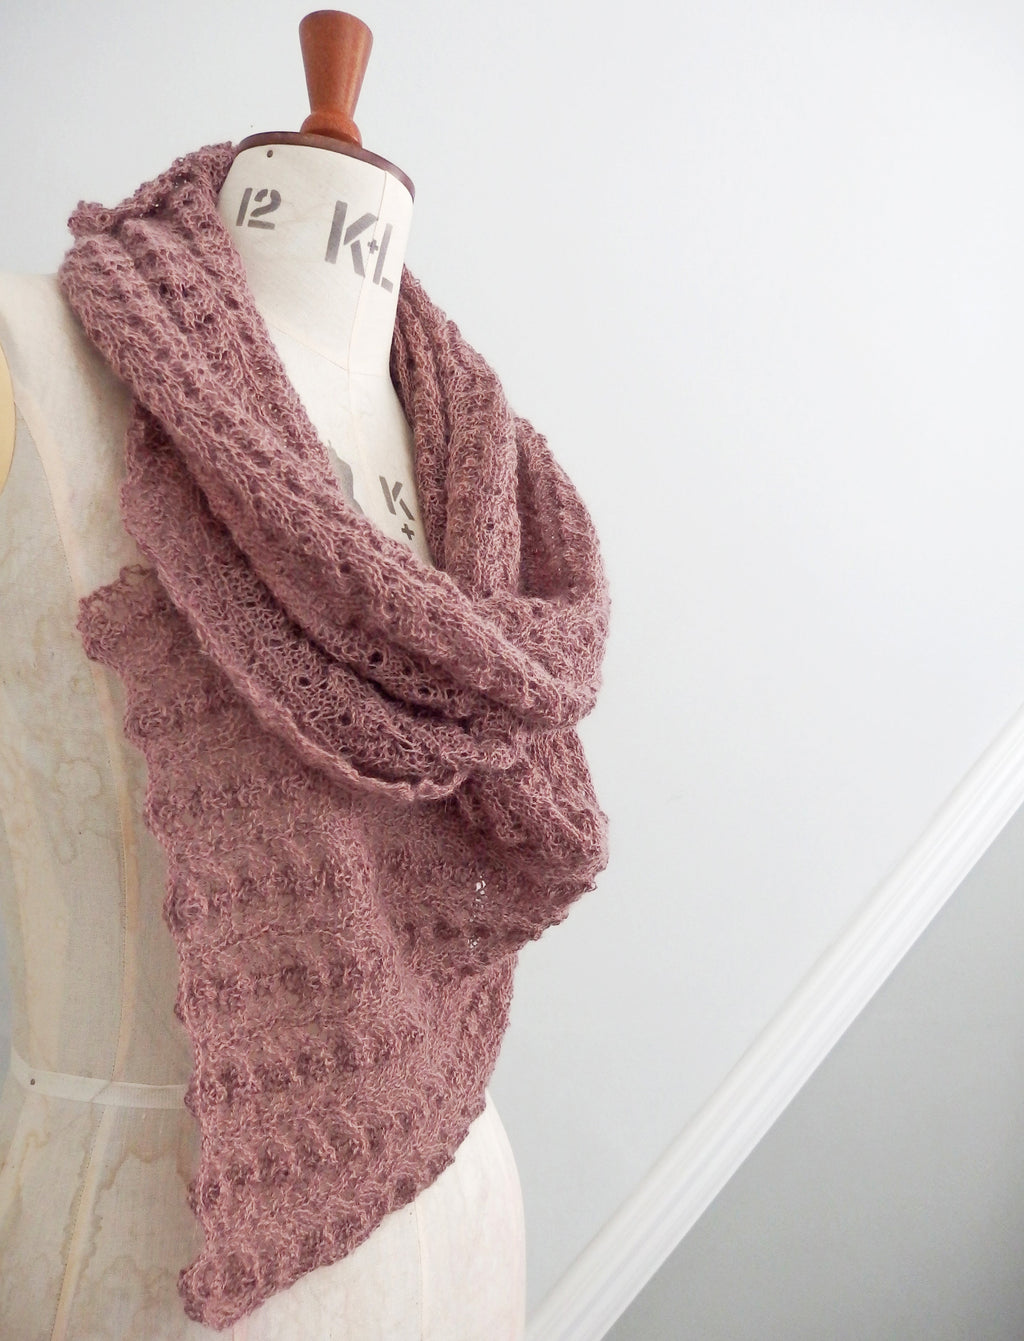 Learn to Knit: Summer Classes at Seam Haberdashery